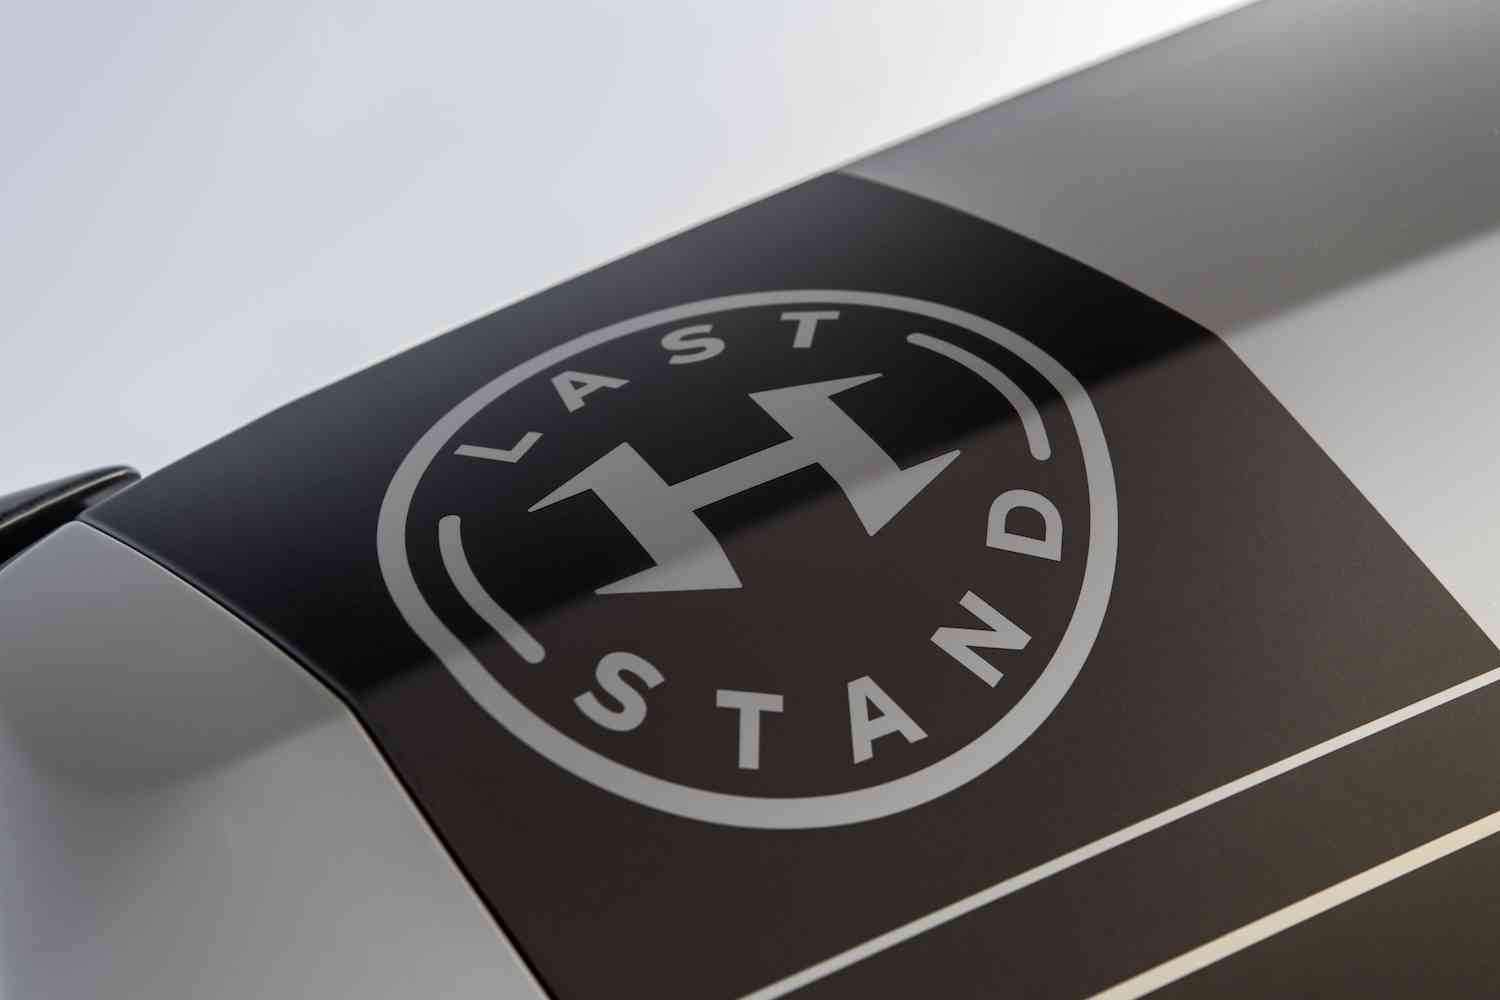 Hennessey Last Stand Logo